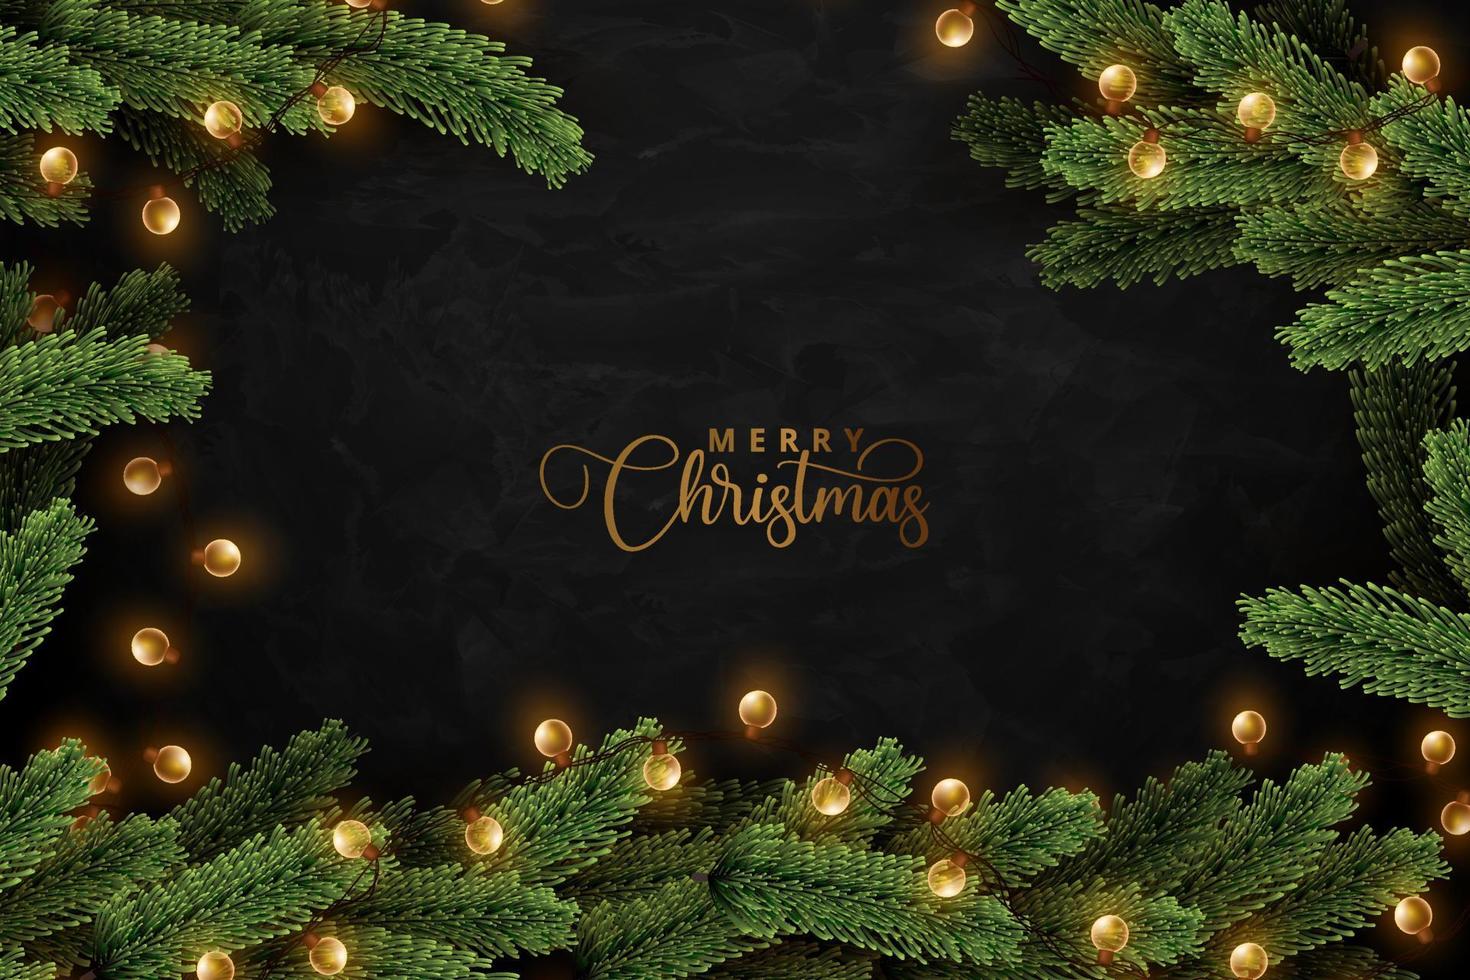 Shiny christmas lights wrapped in realistic pine tree leaves on dark black grunge background. Merry christmas concept design. vector